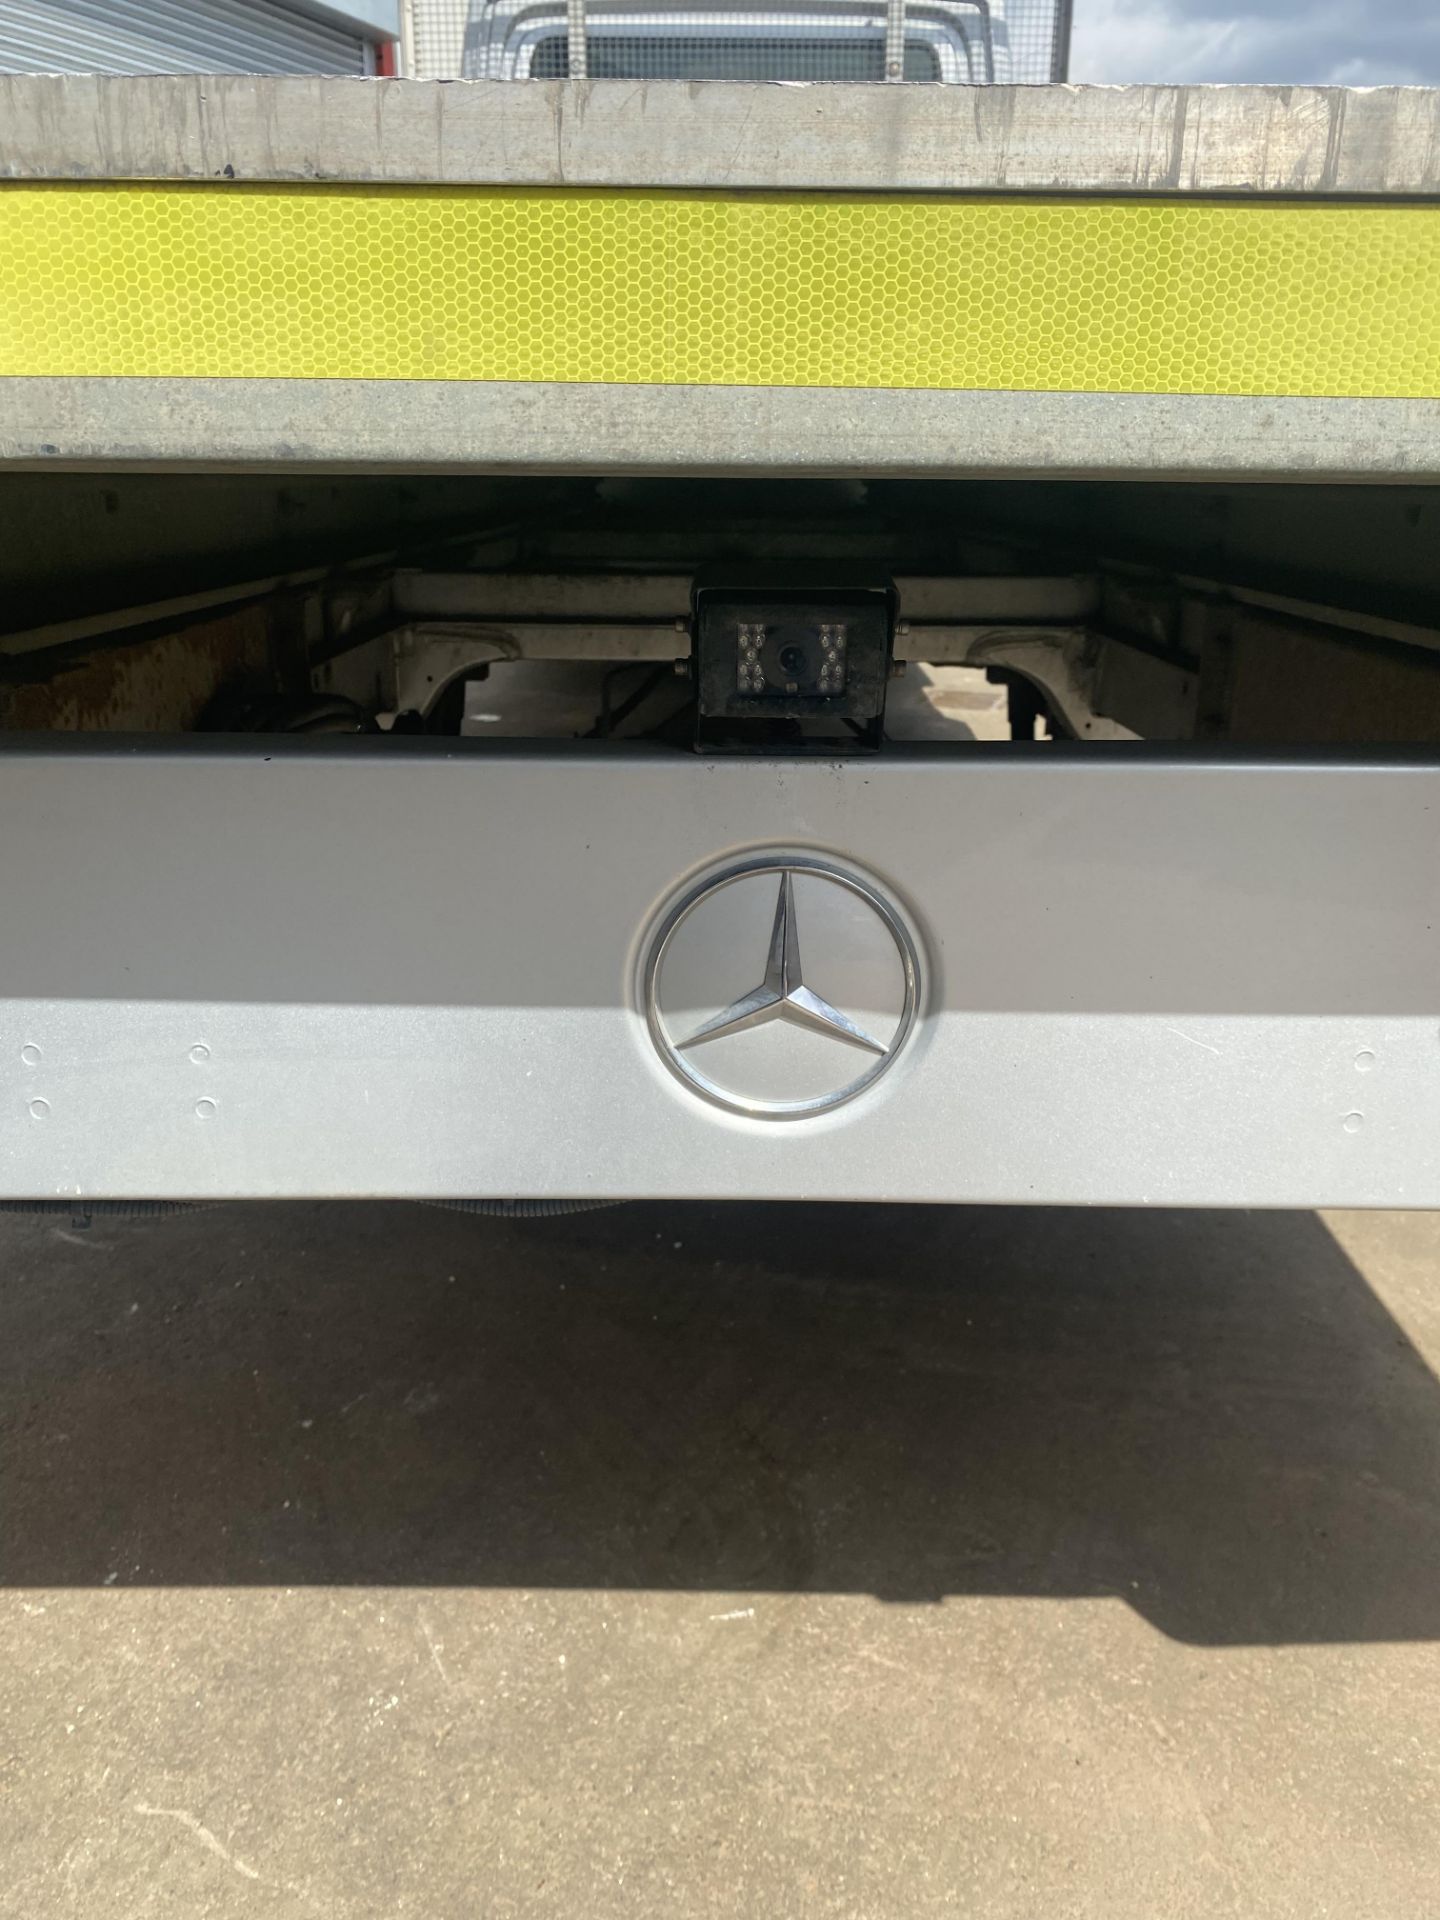 2018 MERCEDES BENZ SPRINTER 316 2.1 CDI L3 DIESEL RWD 3.5T CHASSIS CAB ALUMINIUM FLAT EXTRA LONG - Image 13 of 23